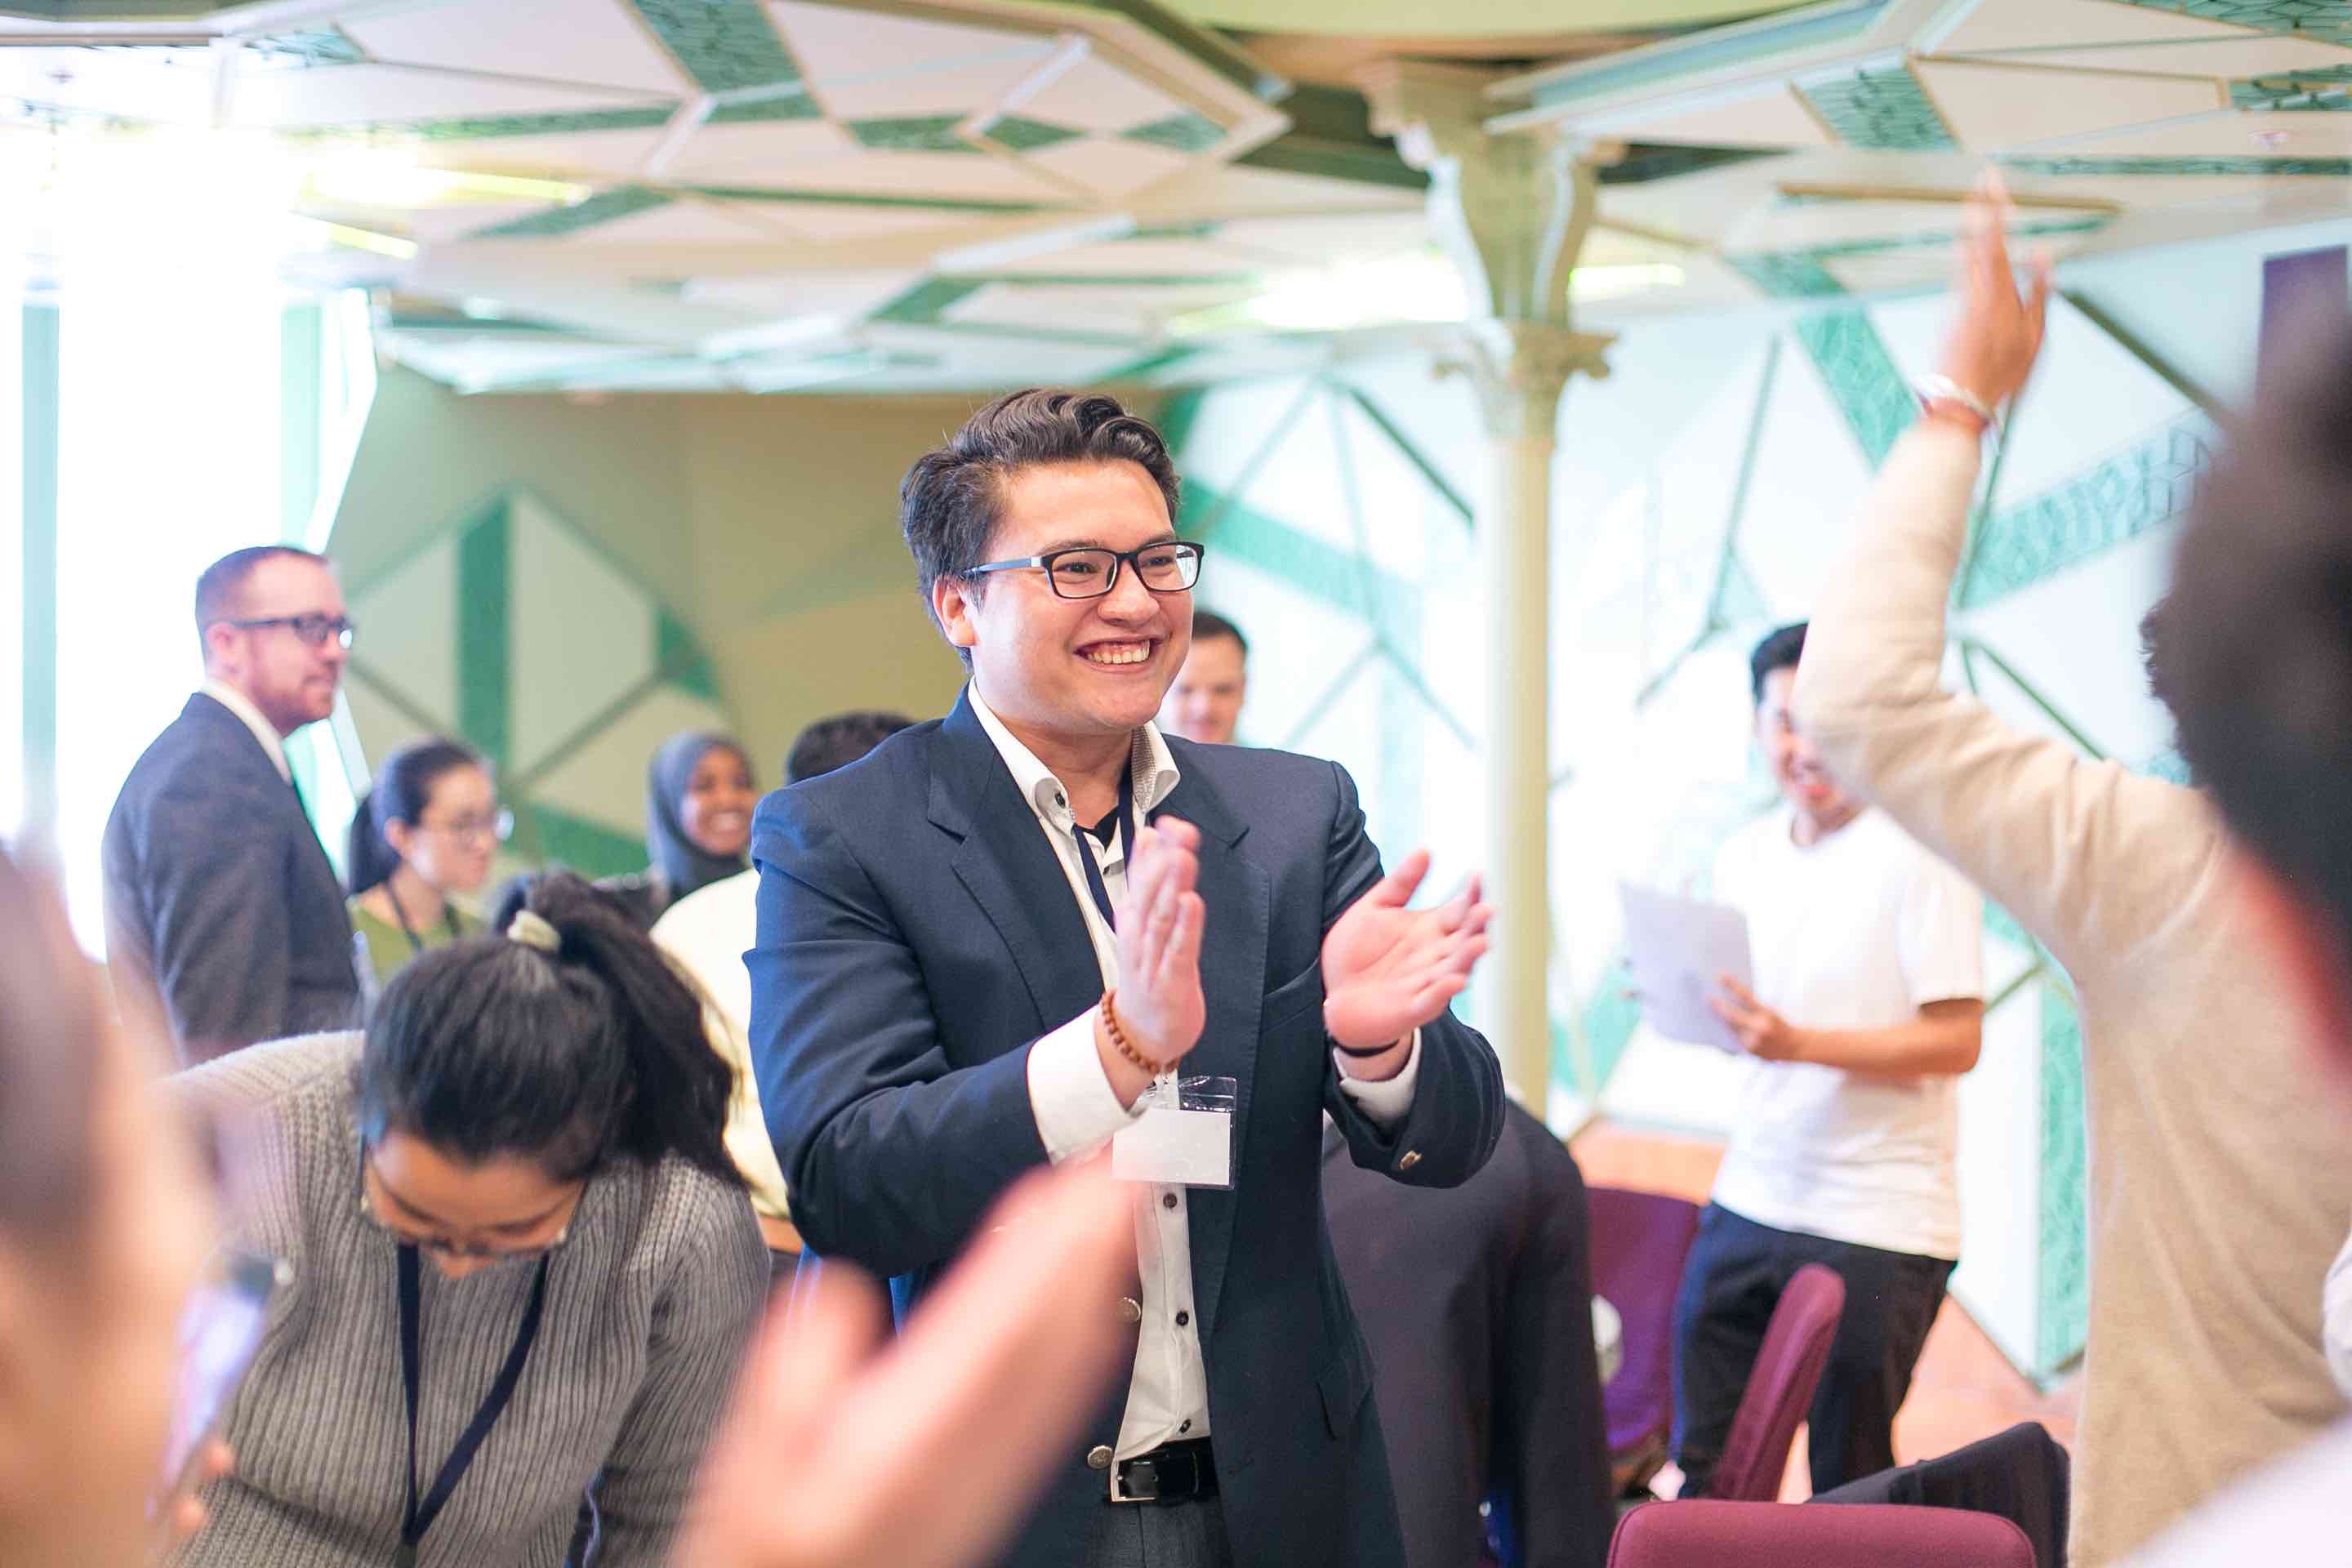 A student at an event claps.